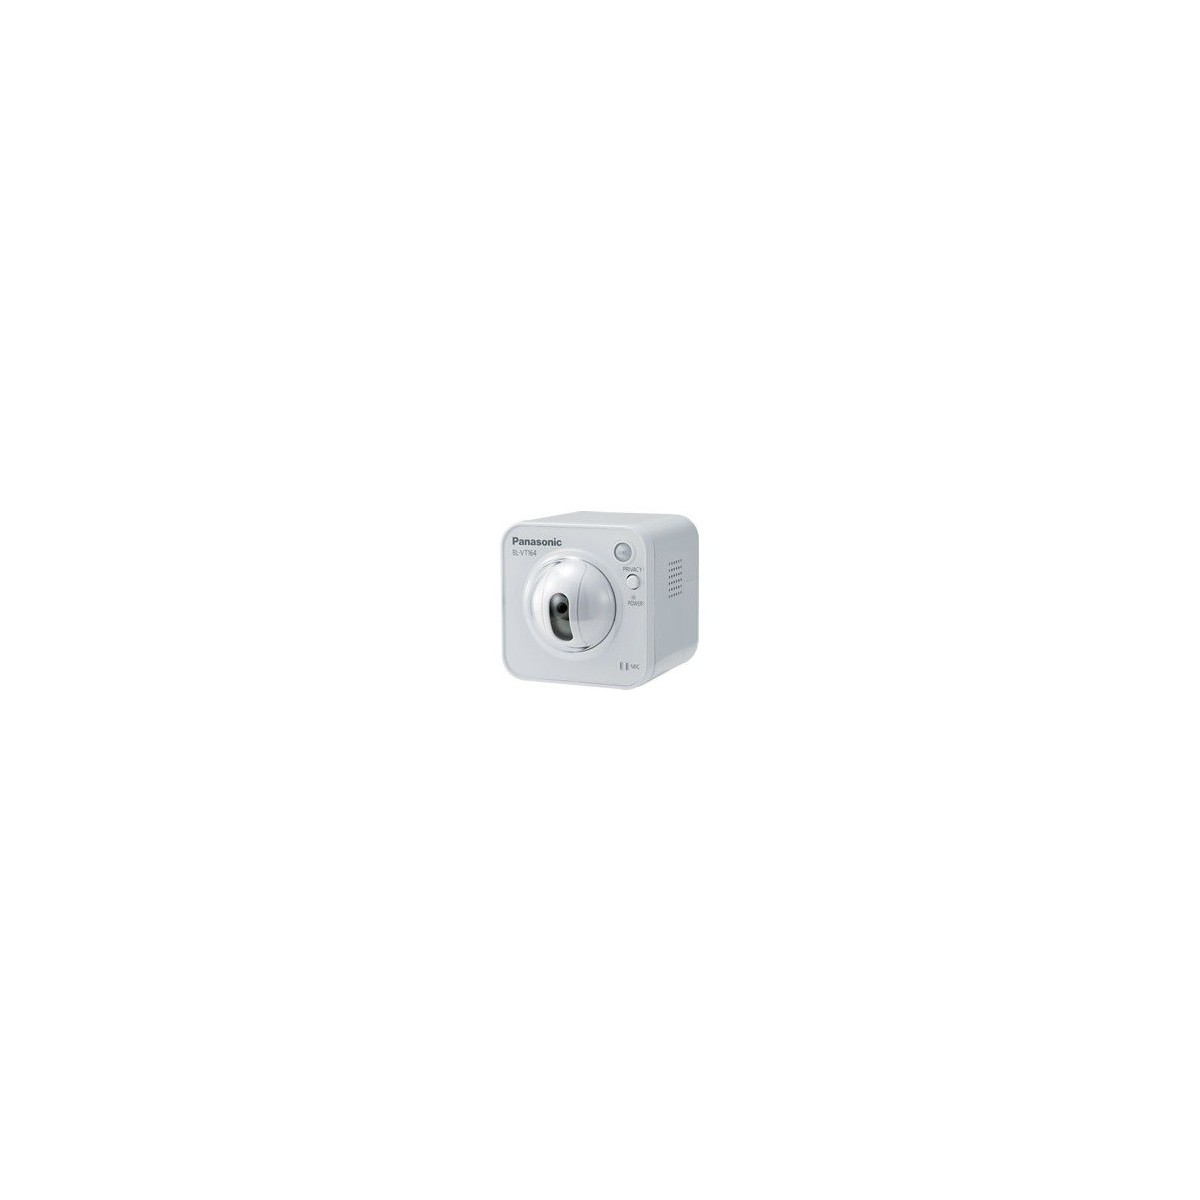 Panasonic BL-VT164E - IP security camera - Indoor - Wired - UL - FCC - ICES - IEC - EN - Cube - Wall